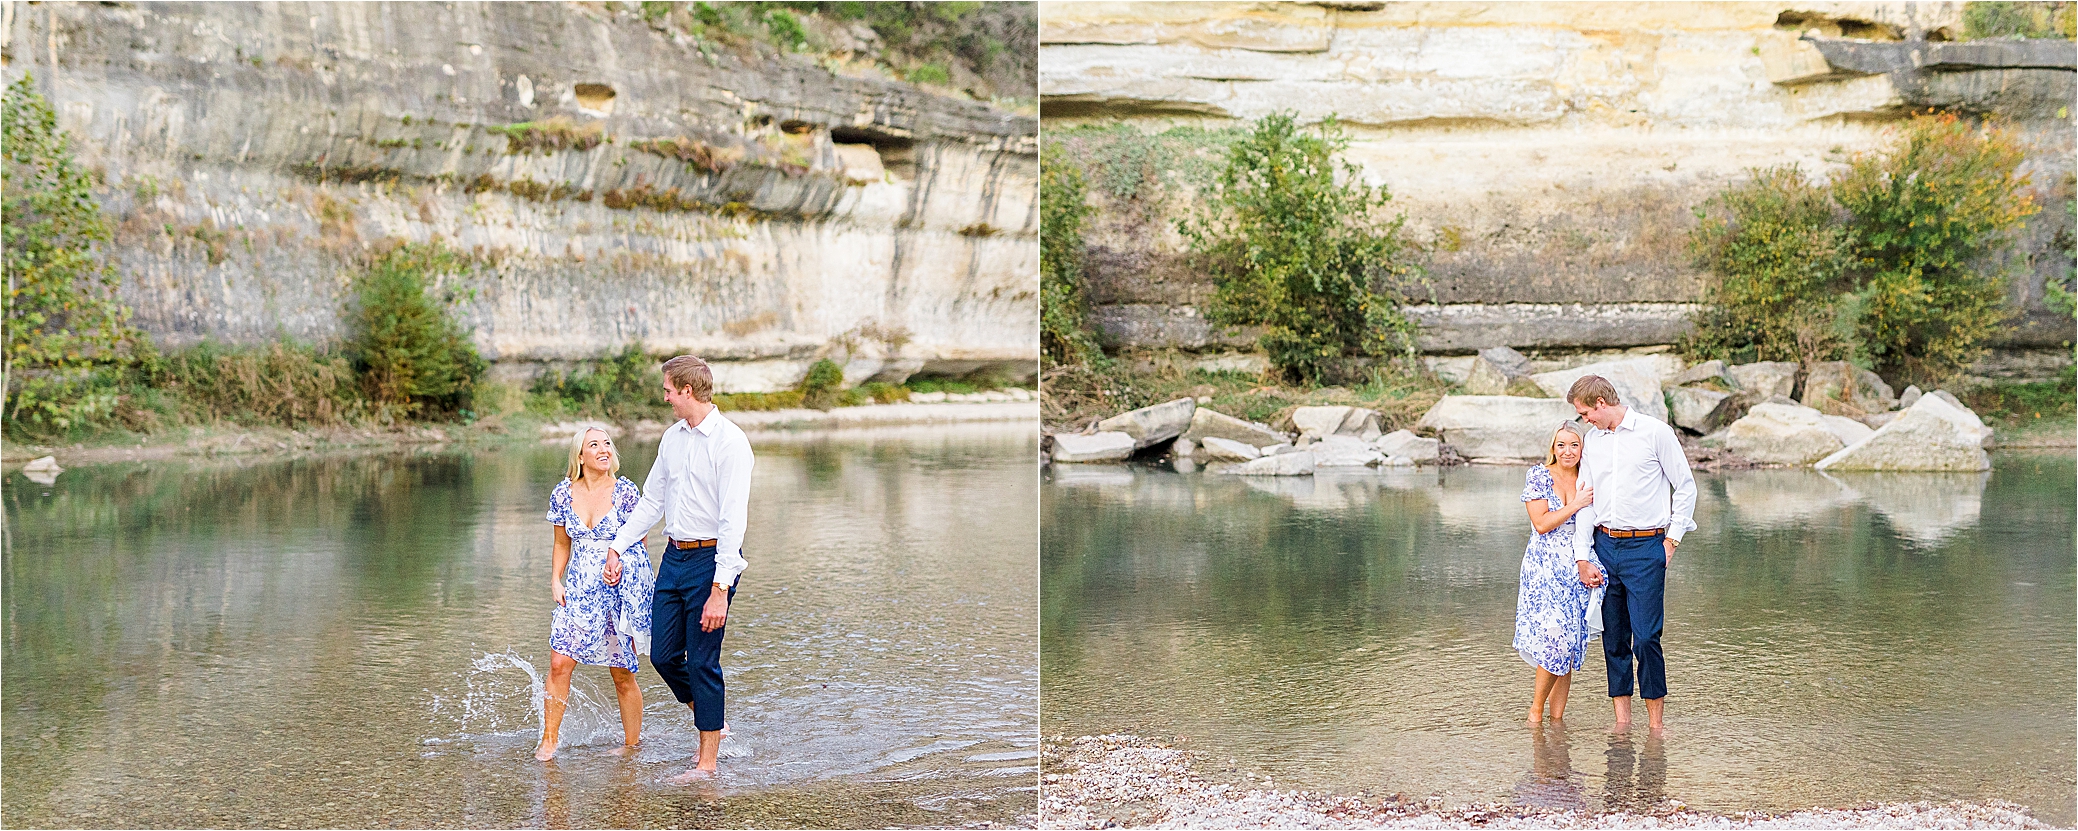 An engaged couple in blue and white hold hands and splash in the water during their engagement session with large rock cliffs in the background at Guadalupe River State Park near Boerne, Texas 